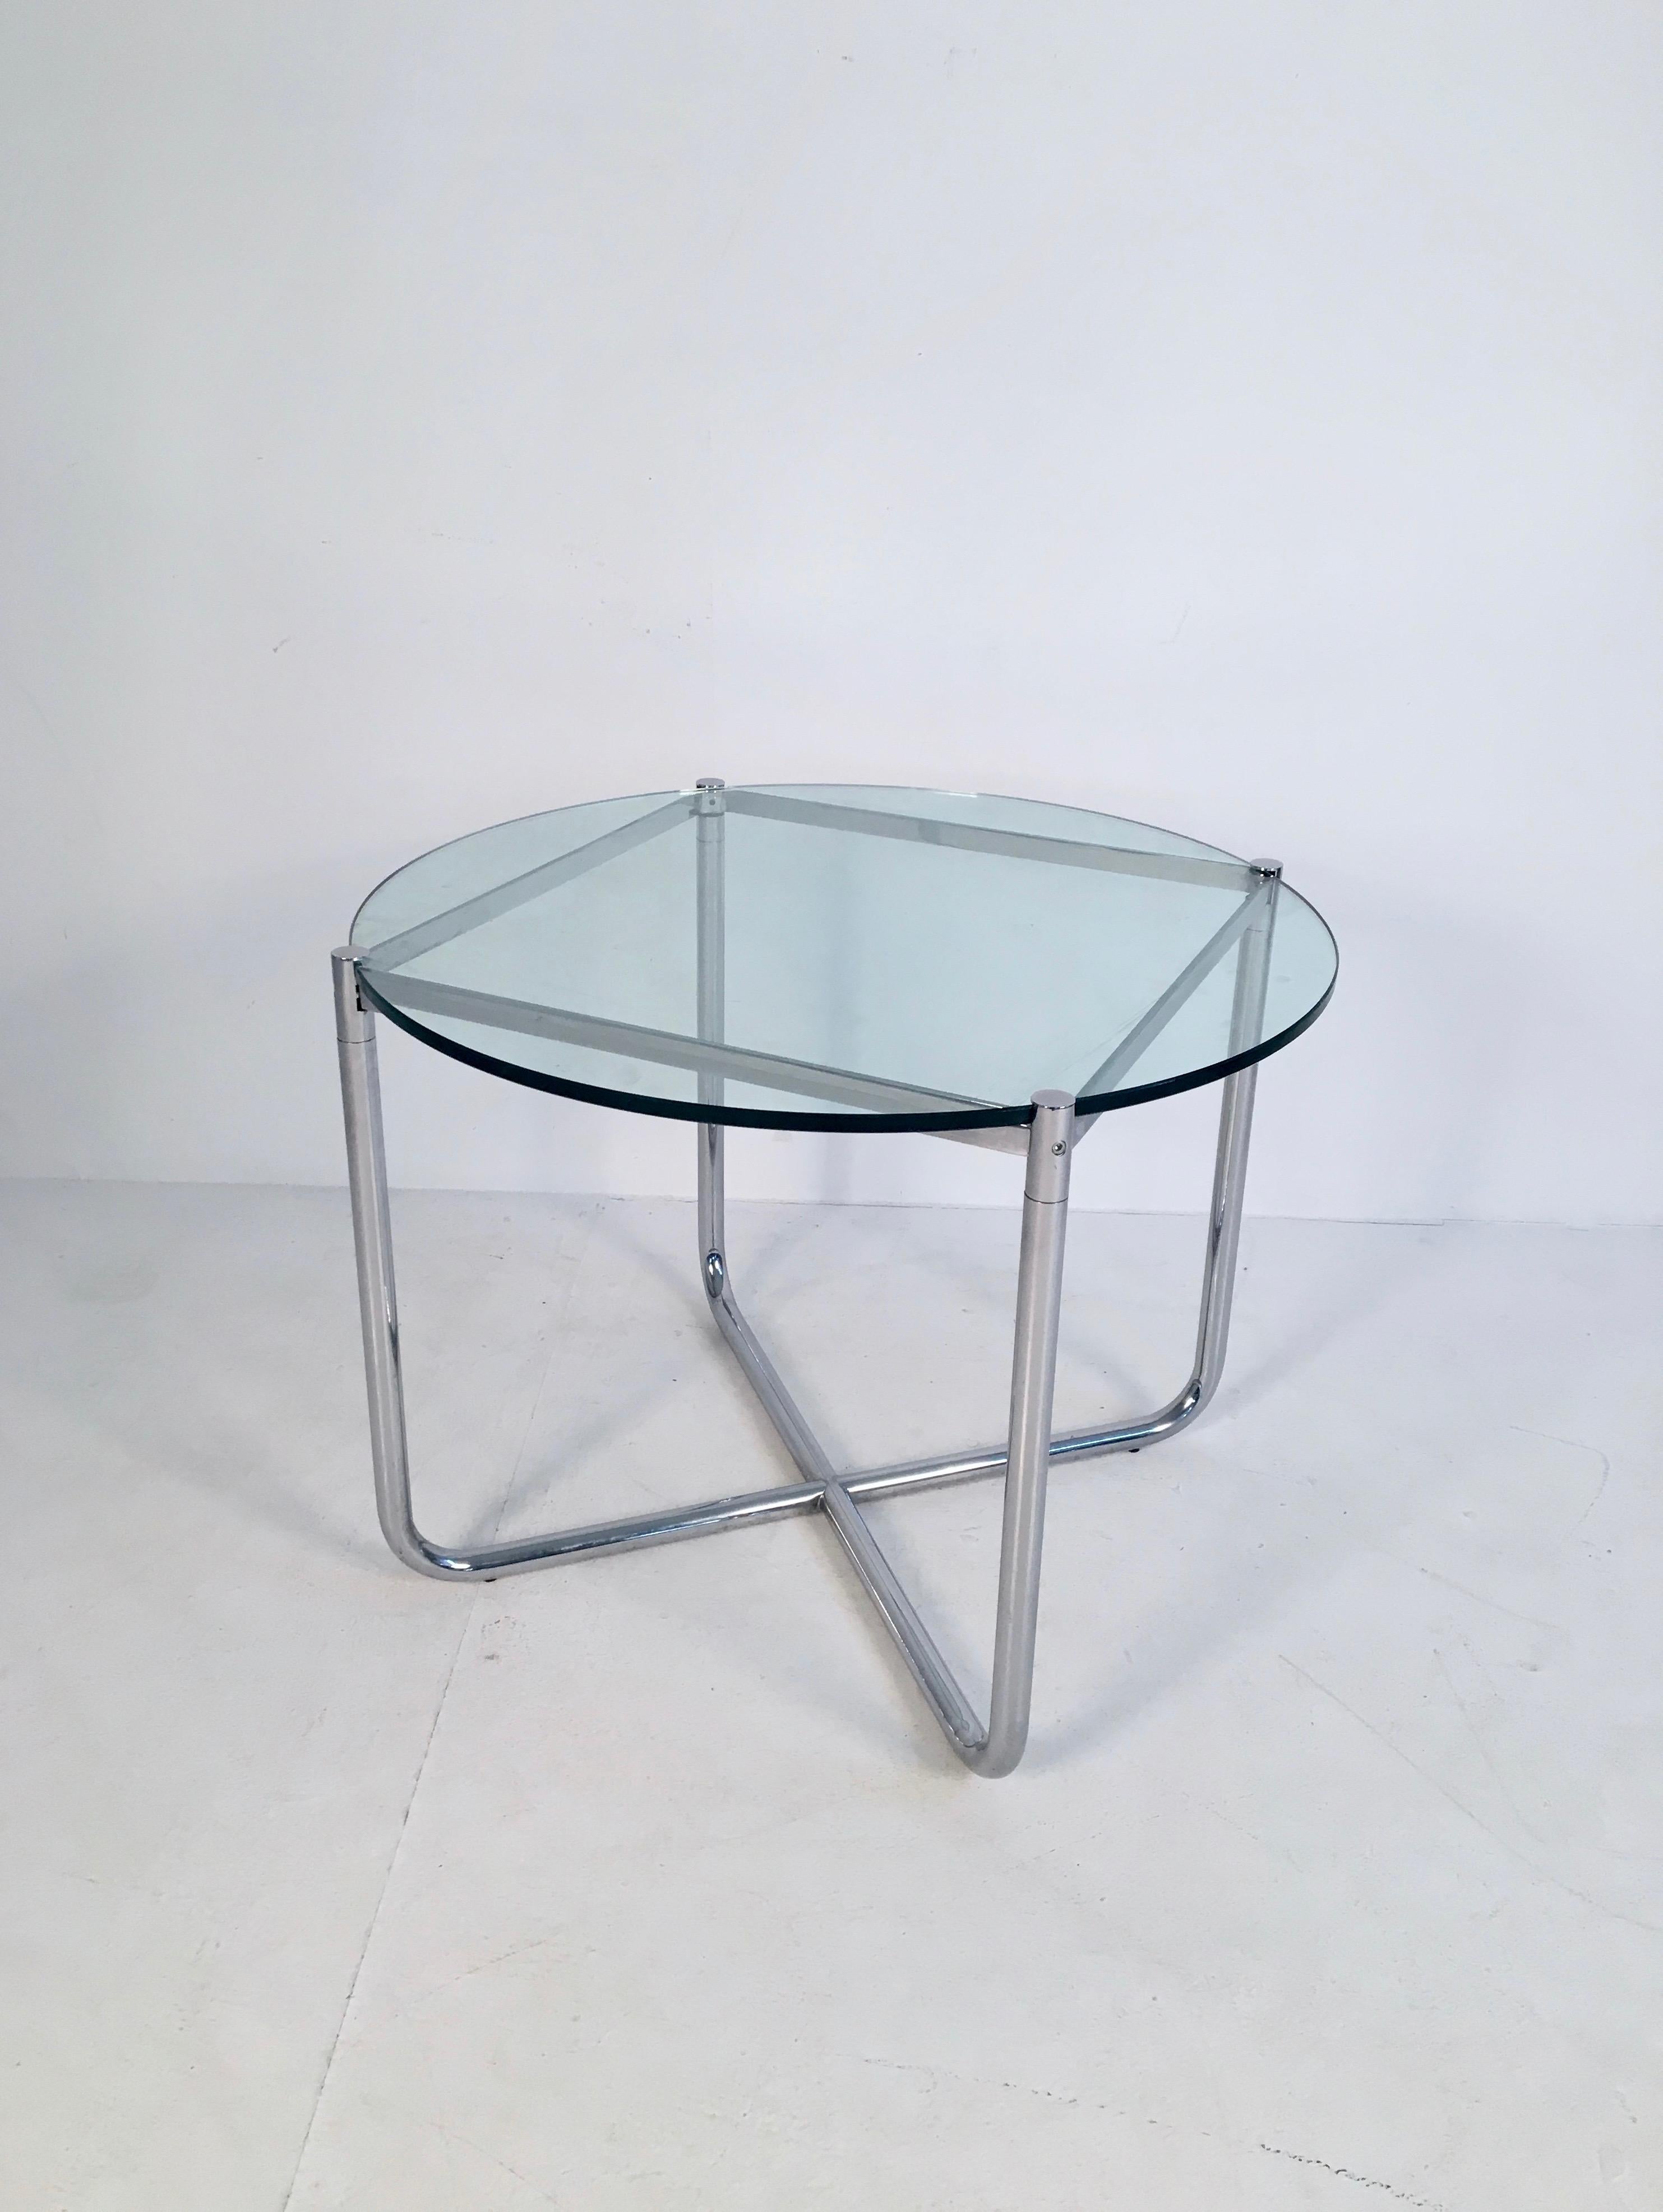 Bauhaus Midcentury Glass and Chrome Side Table by Mies van der Rohe for Knoll circa 1970 For Sale